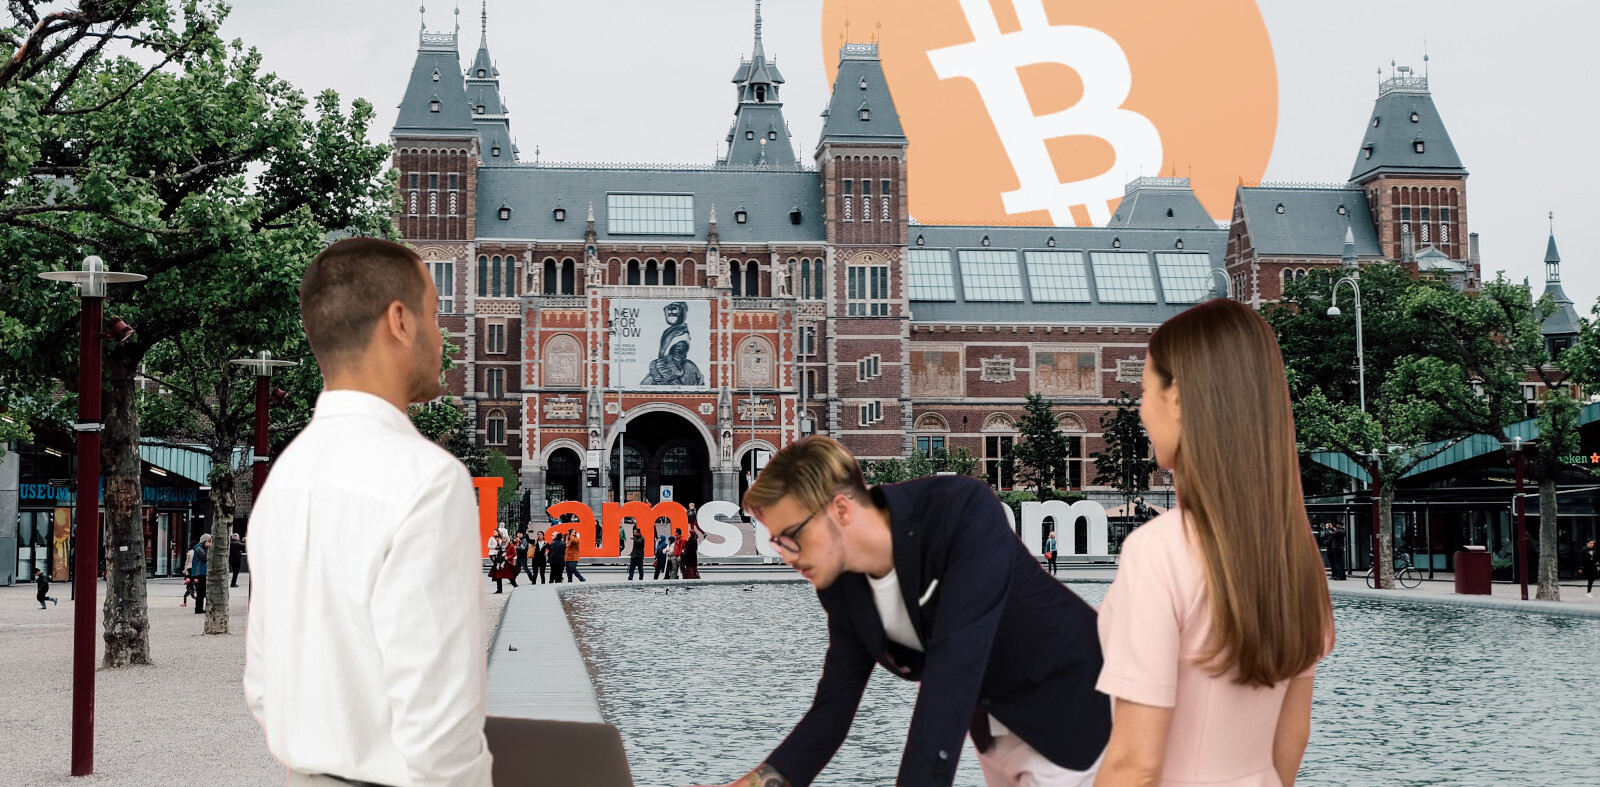 5 reasons why Amsterdam is great for blockchain tech development